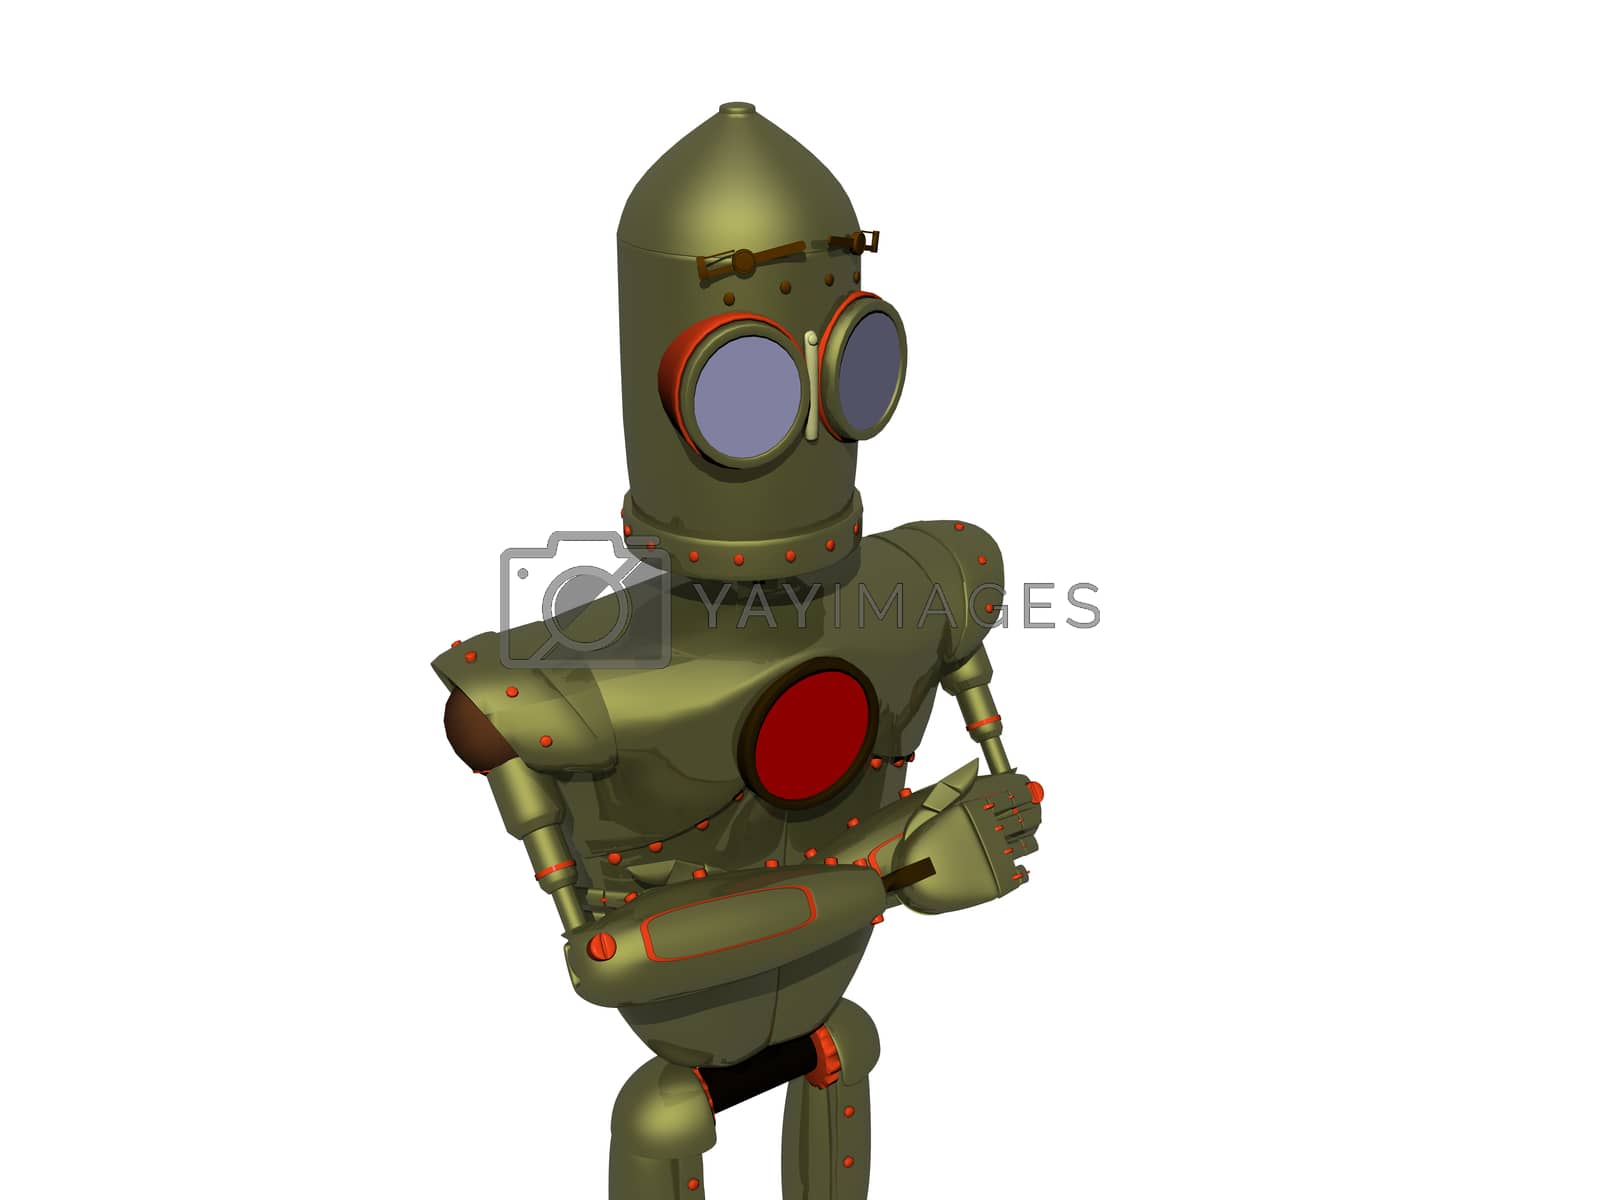 Royalty free image of humanoid steel cartoon robot by Dr-Lange